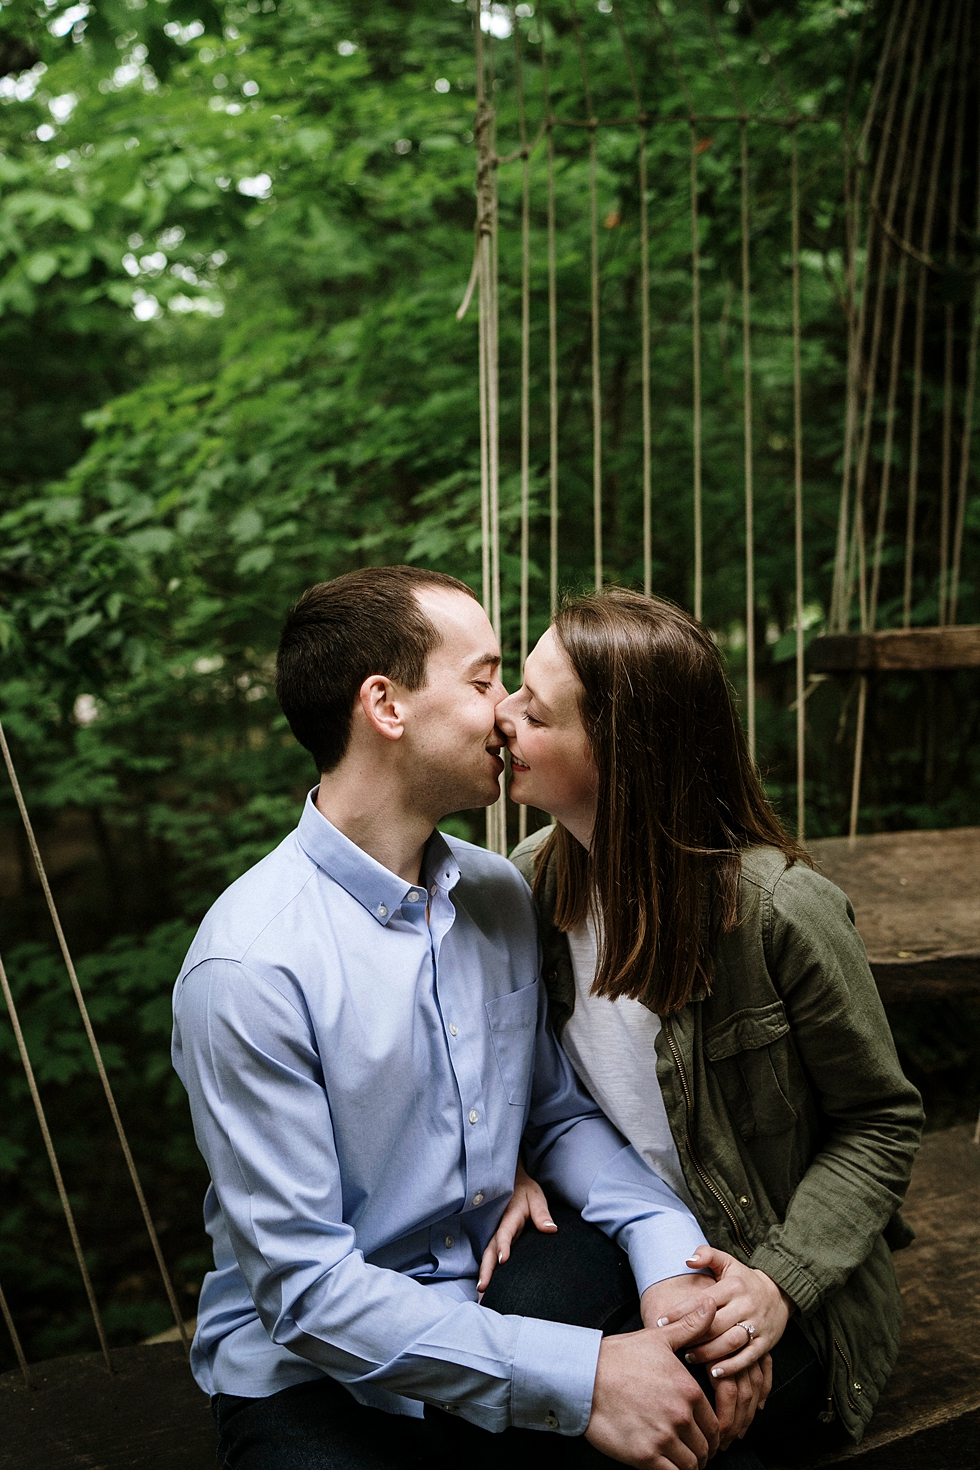  Sharing kisses at this dreamy engagement shoot at Bernheim forest in Louisville Kentucky. spring engagement photoshoot Bernheim forest Louisville Kentucky photography by Lauren fiancé wedding announcement photos love getting married southern wedding